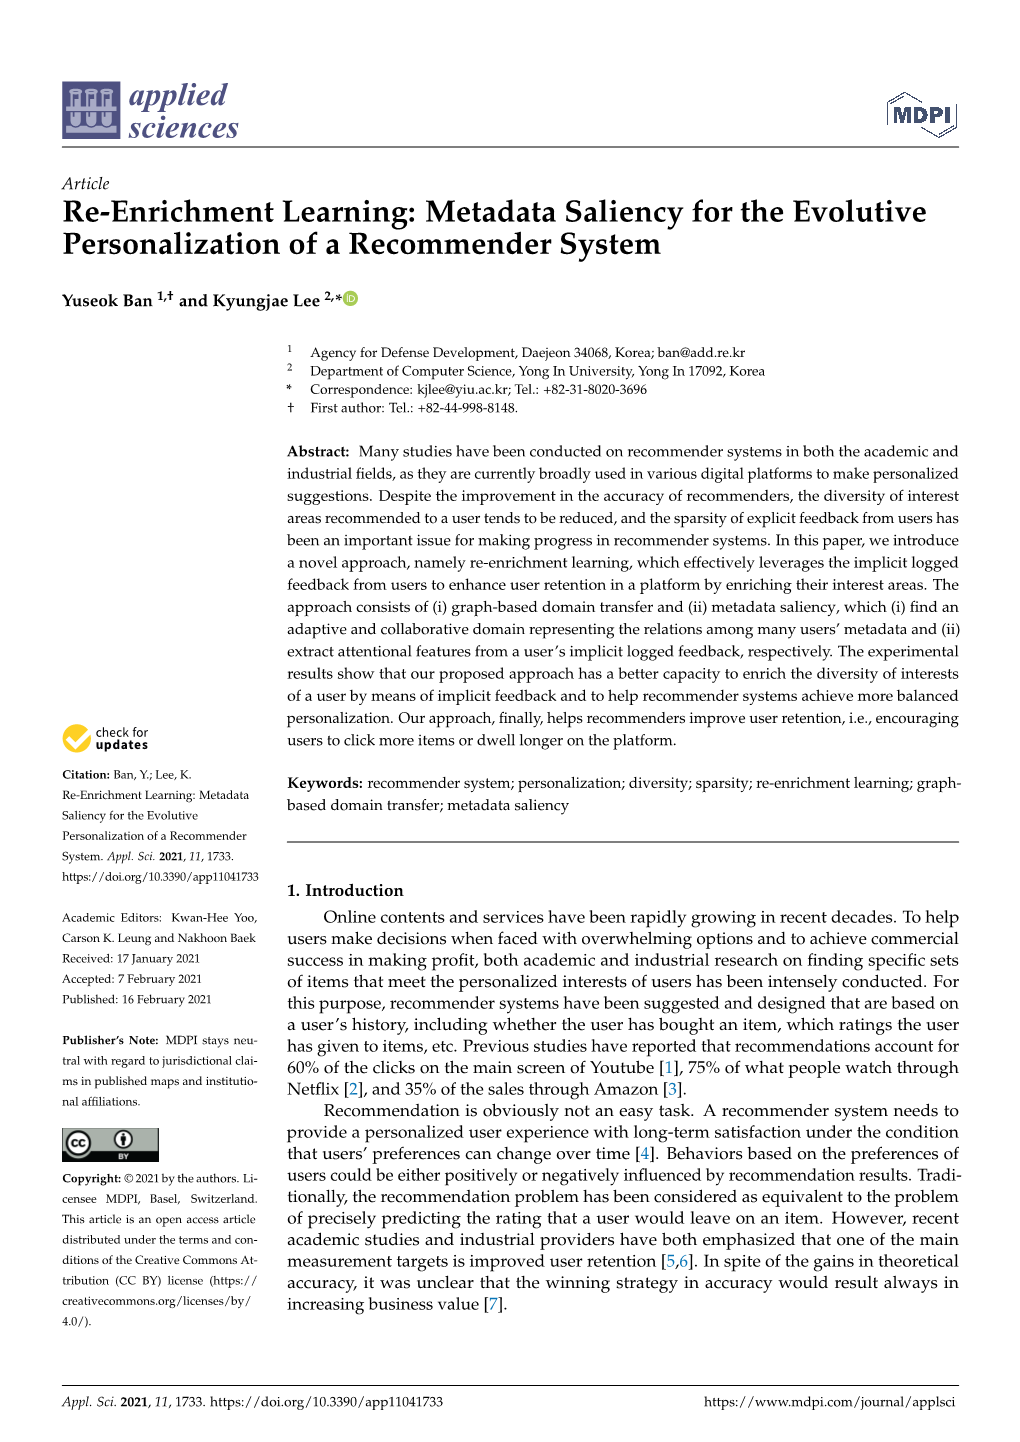 Re-Enrichment Learning: Metadata Saliency for the Evolutive Personalization of a Recommender System